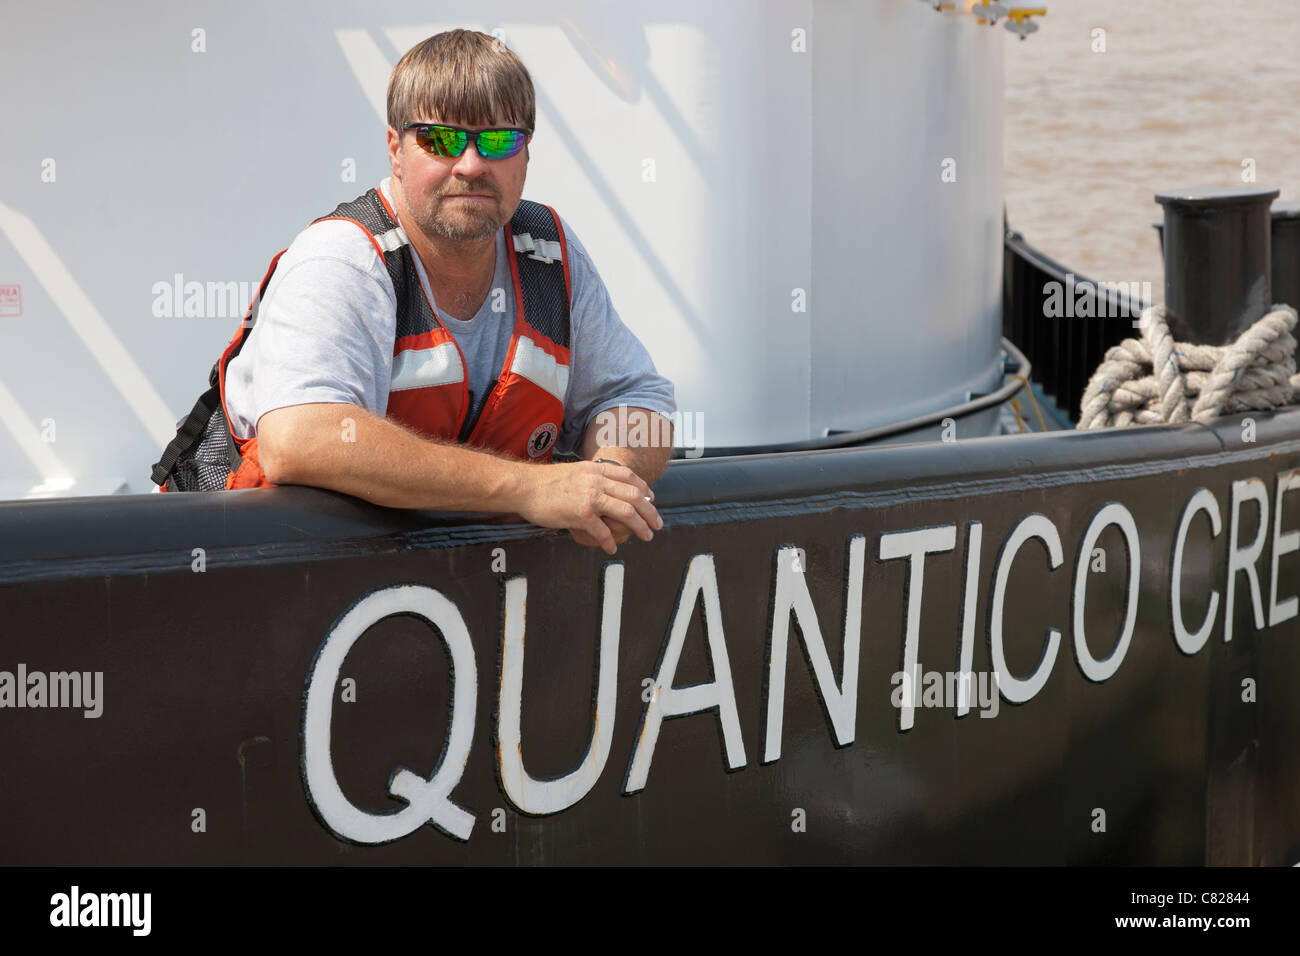 A crew member on the tugboat Quantico Creek after the 2011 Great North River Tugboat Race and Competition in New York City. Stock Photo